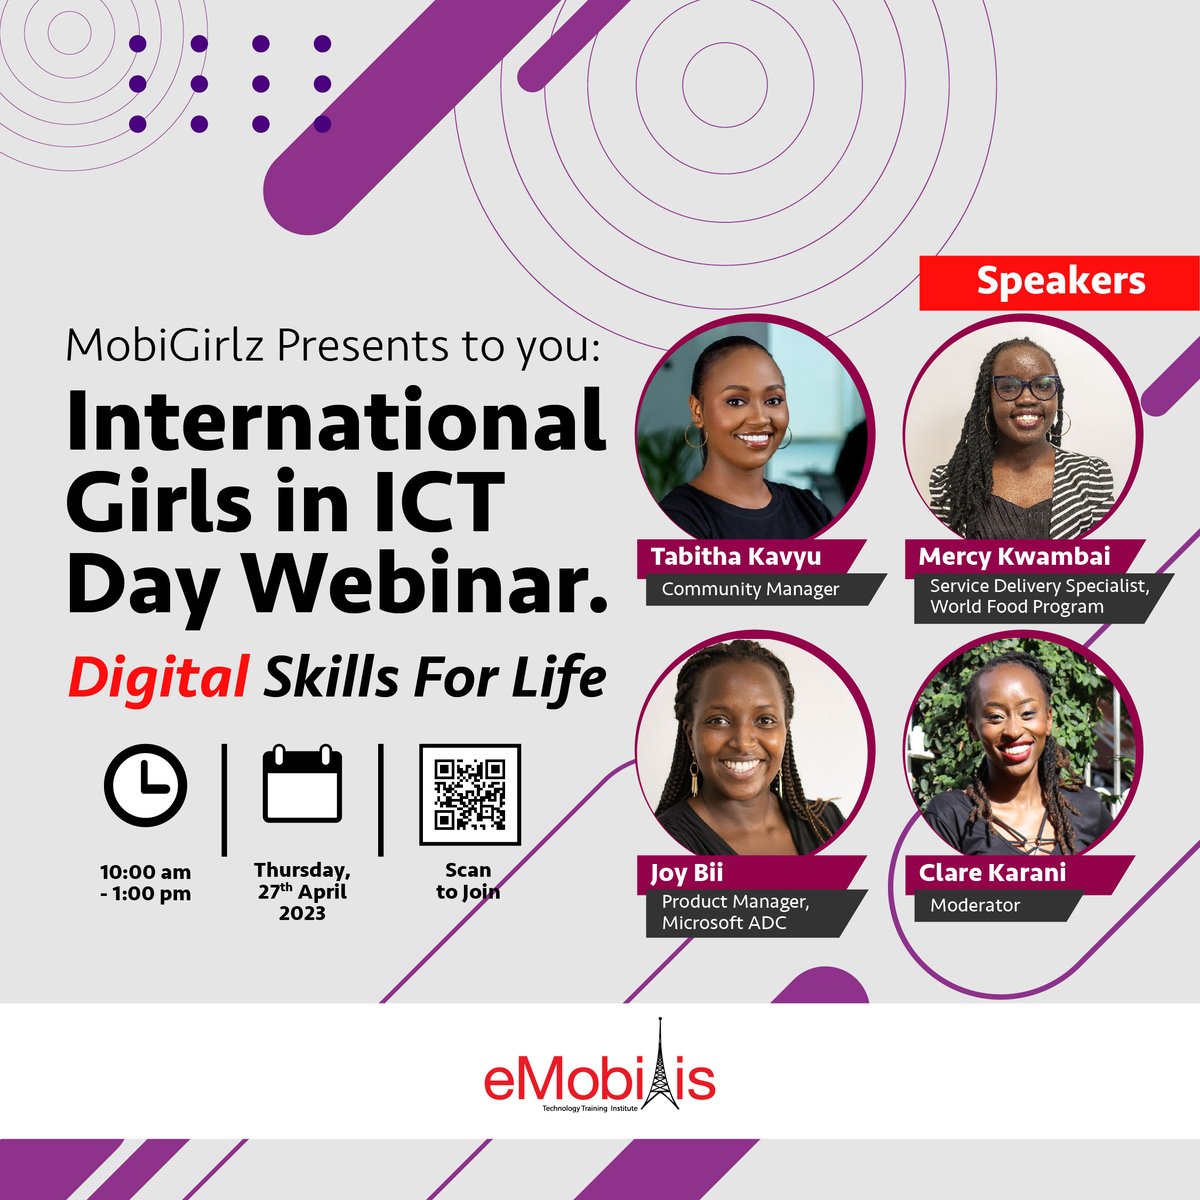 Attention Ladies in STEM & Tech enthusiasts📢
@MobiGirlz is hosting an epic webinar to celebrate #InternationalGirlsinICTDay on 27th April! Hear from an incredible lineup of speakers sharing their experience, challenges & tools.

Sign up now at bit.ly/3KABWRU
#GirlsInICT